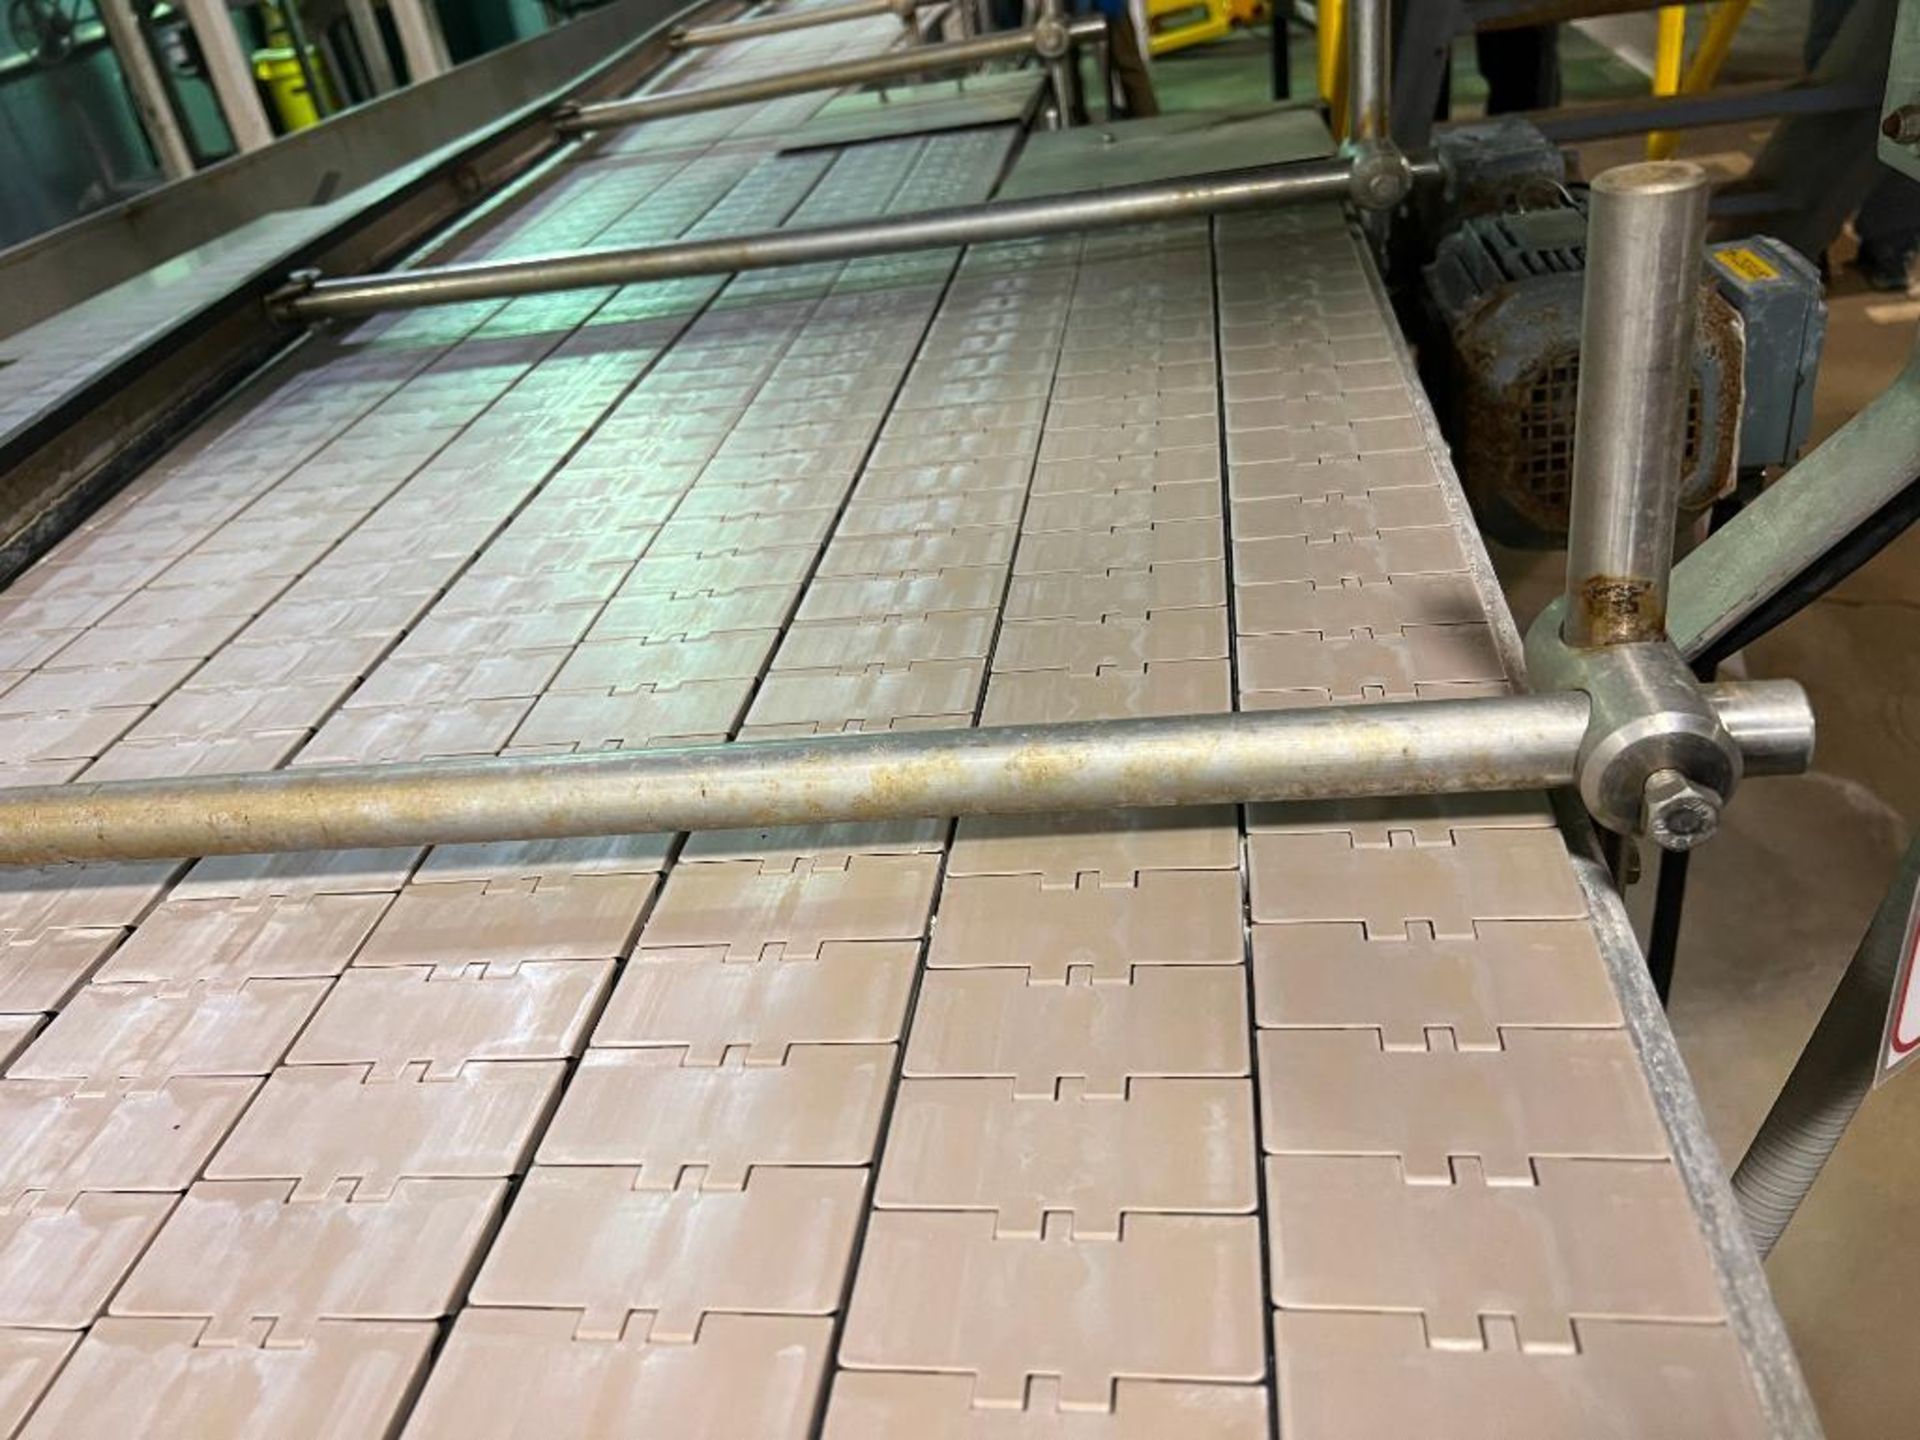 stainless steel step-belt can conveyor - Image 8 of 25